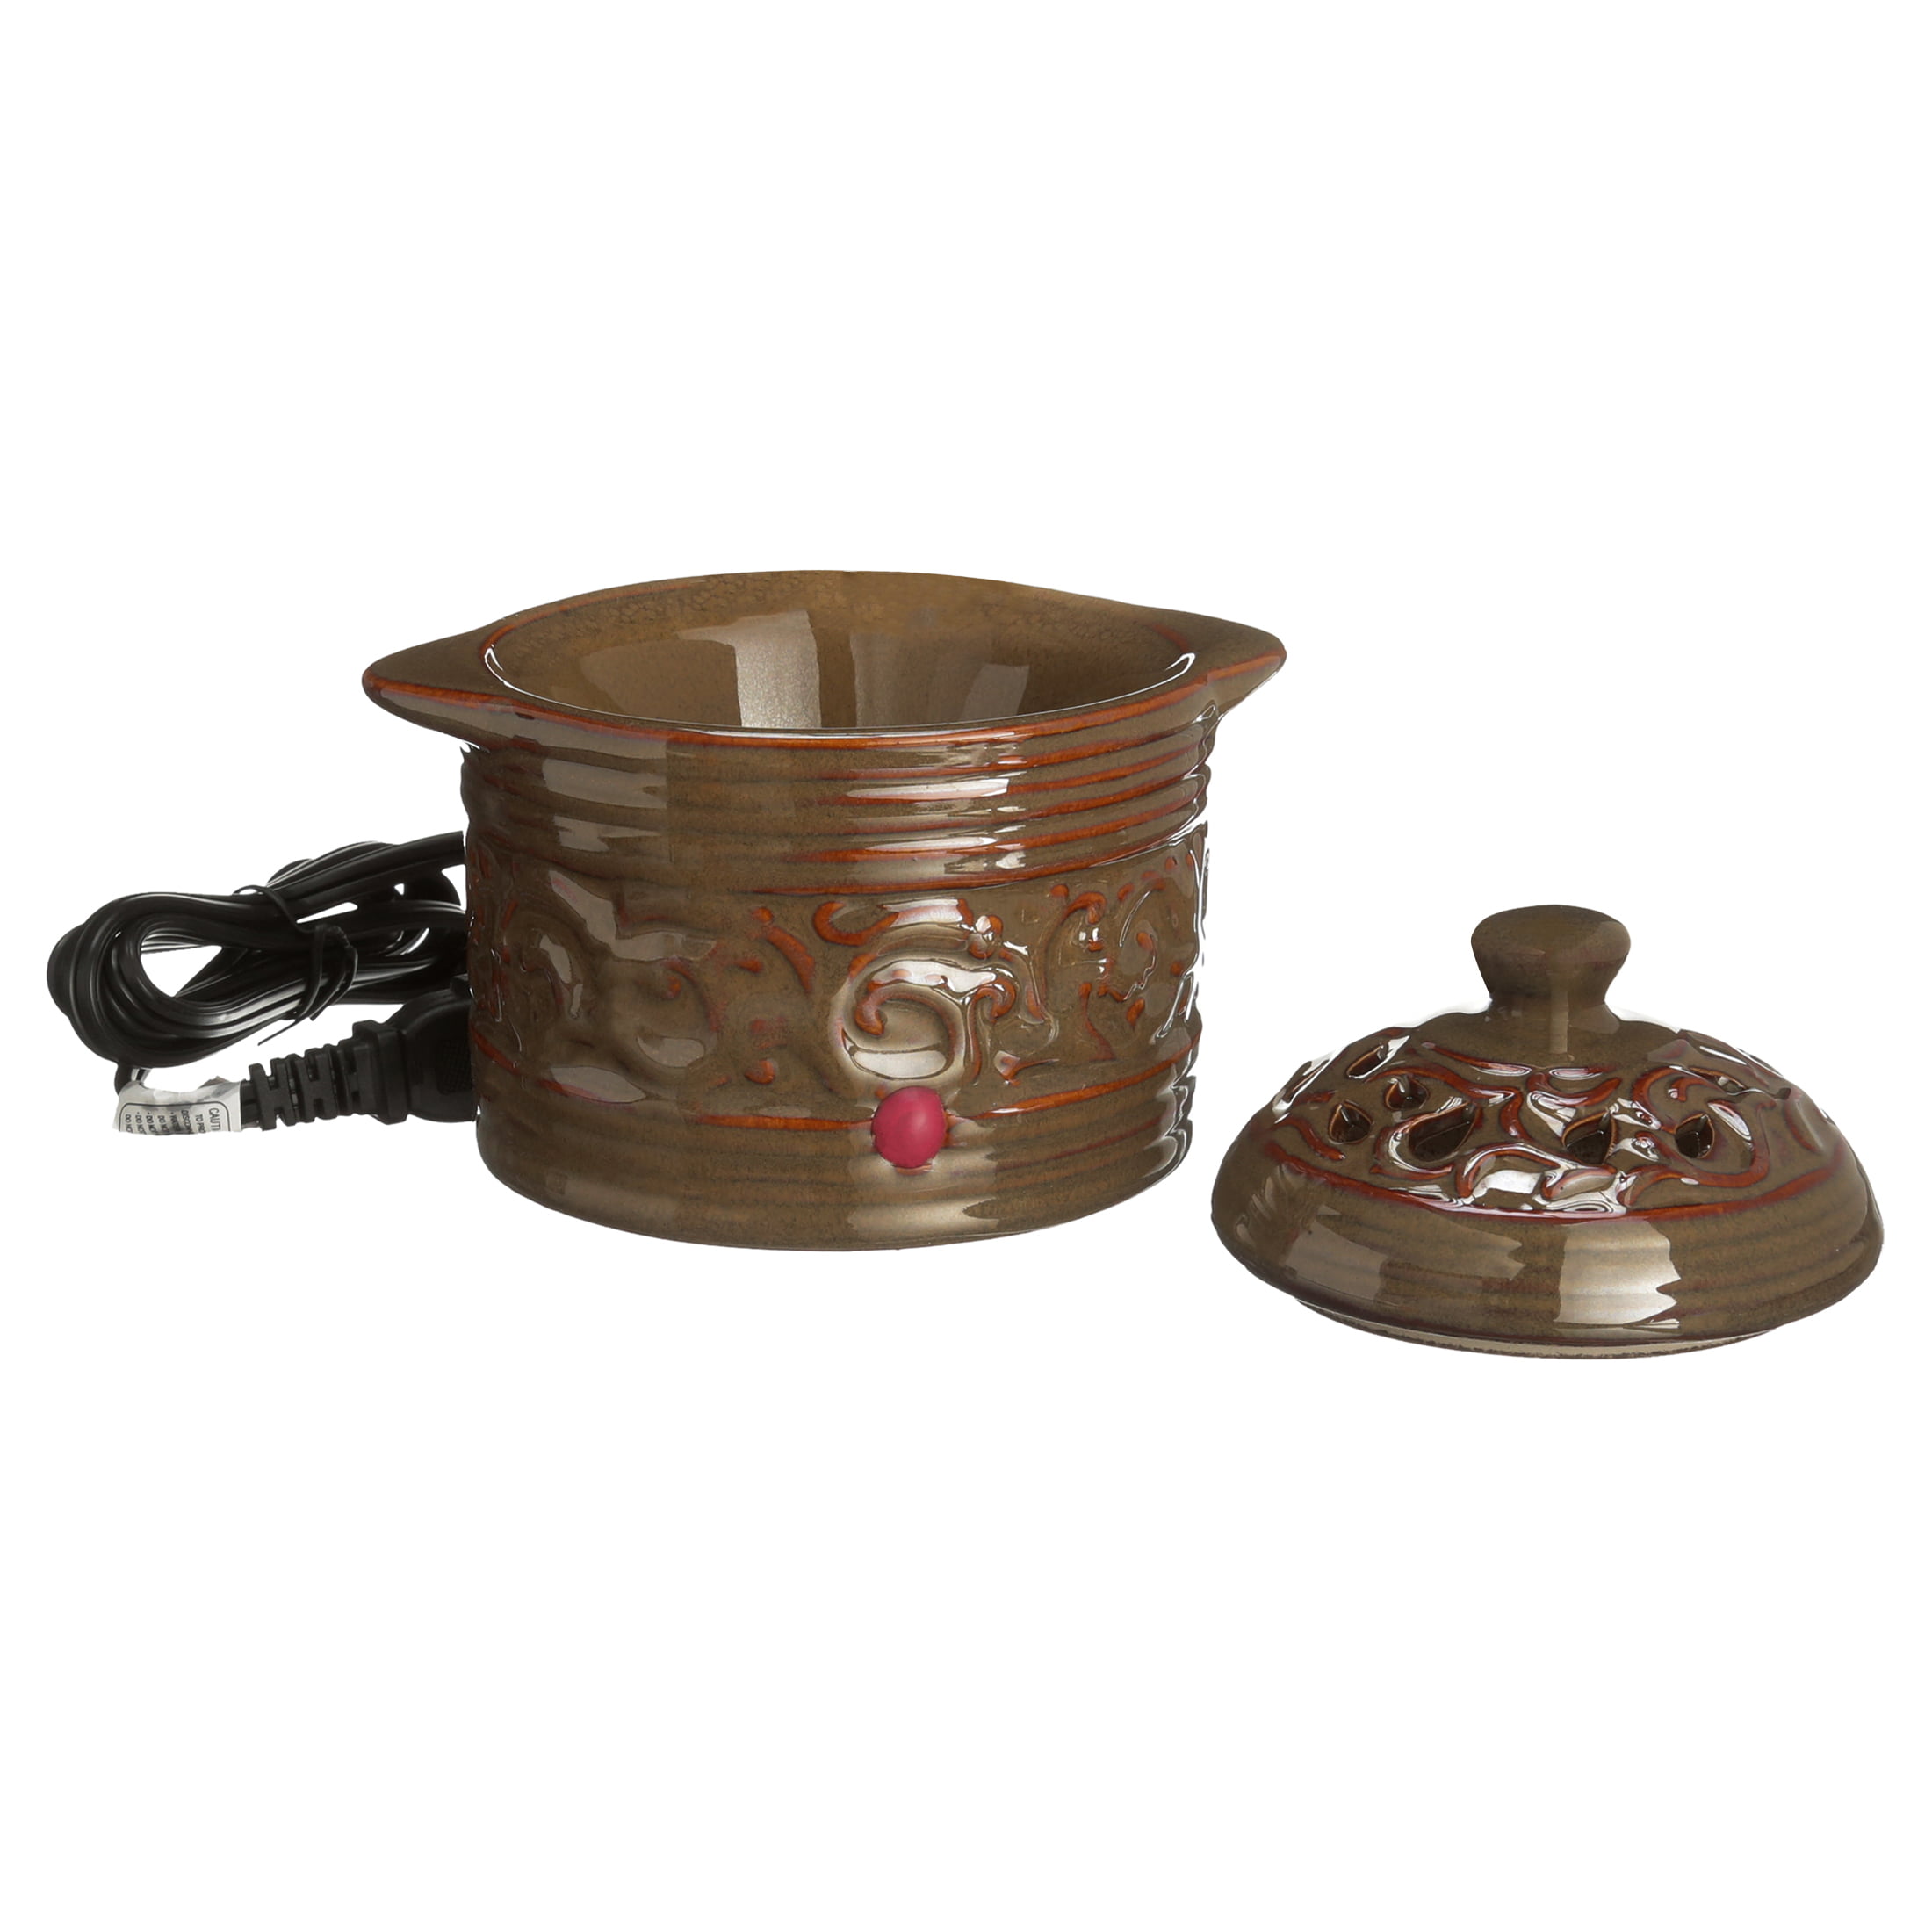 Hosley's Red Electric Potpourri Warmer, 5.75 Diameter. Ideal Gift